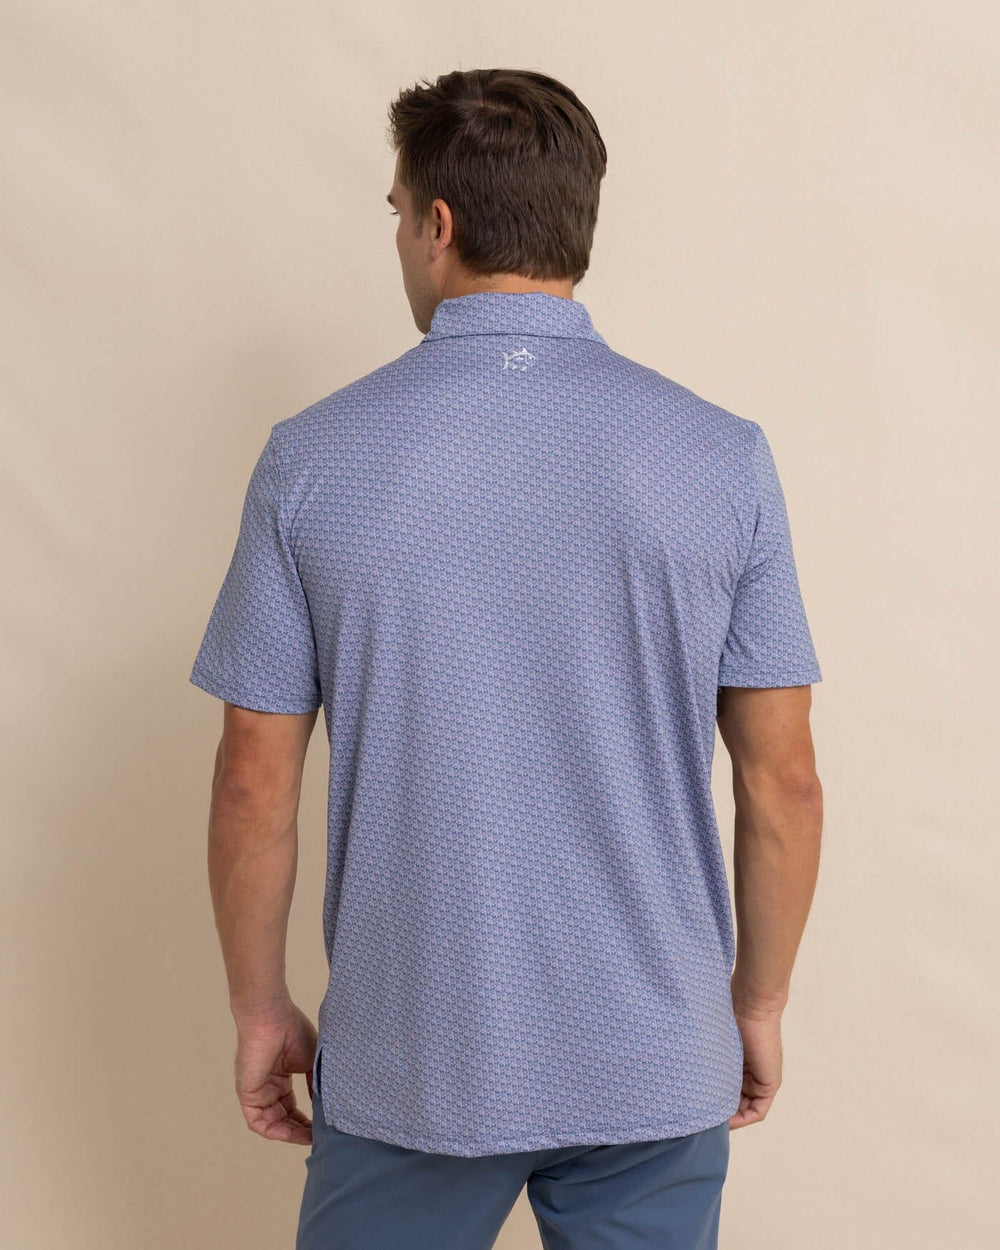 The back view of the Southern Tide Driver Vacation Views Printed Polo by Southern Tide - Wisteria Purple